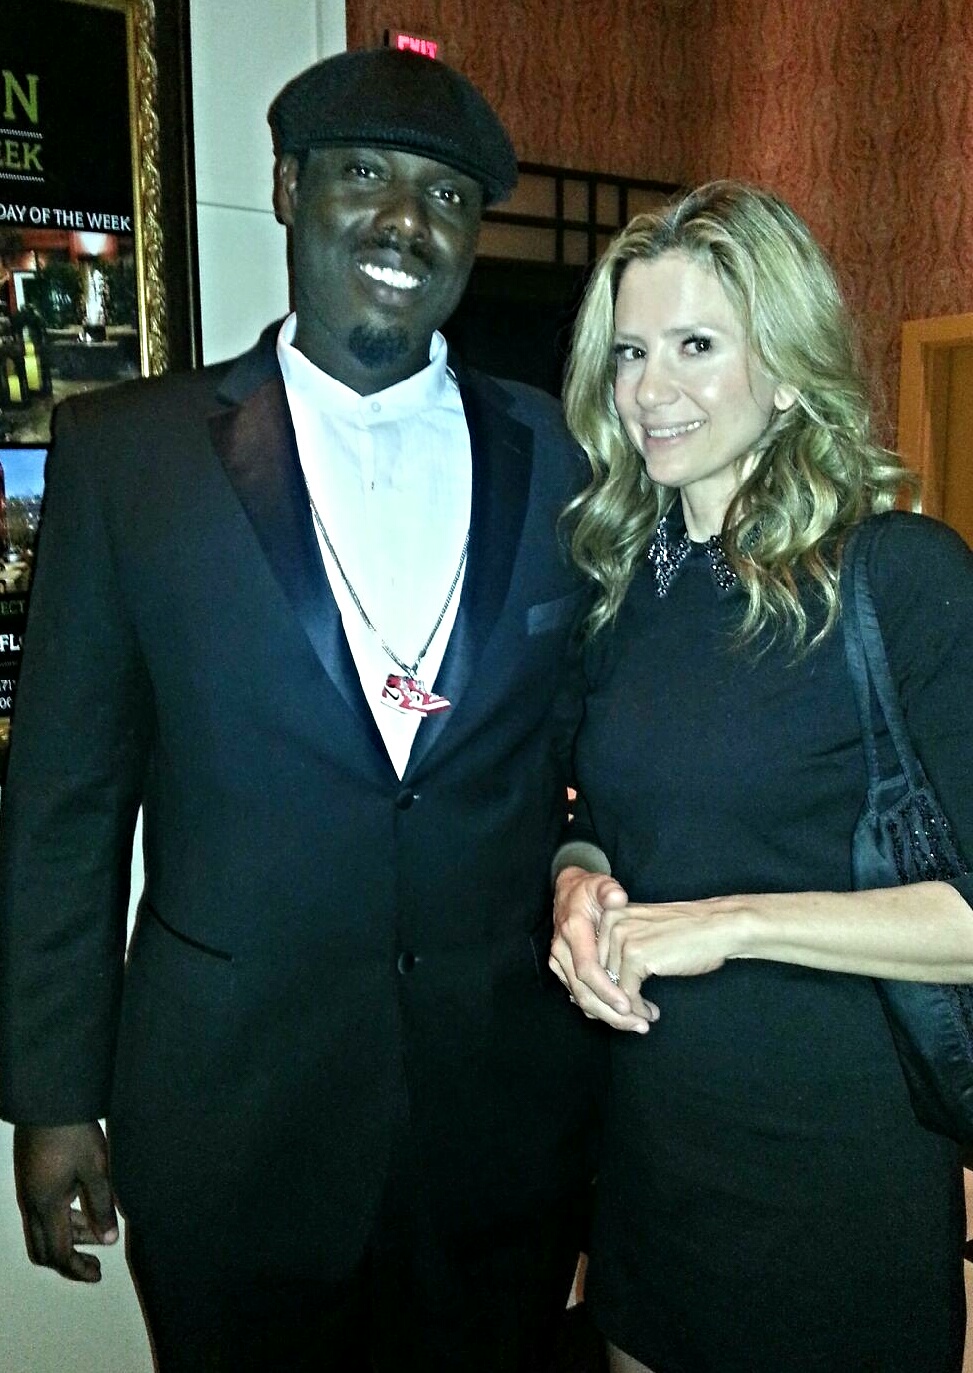 Pictured w/ Mira Sorvino at the Do You Believe? Premiere party.